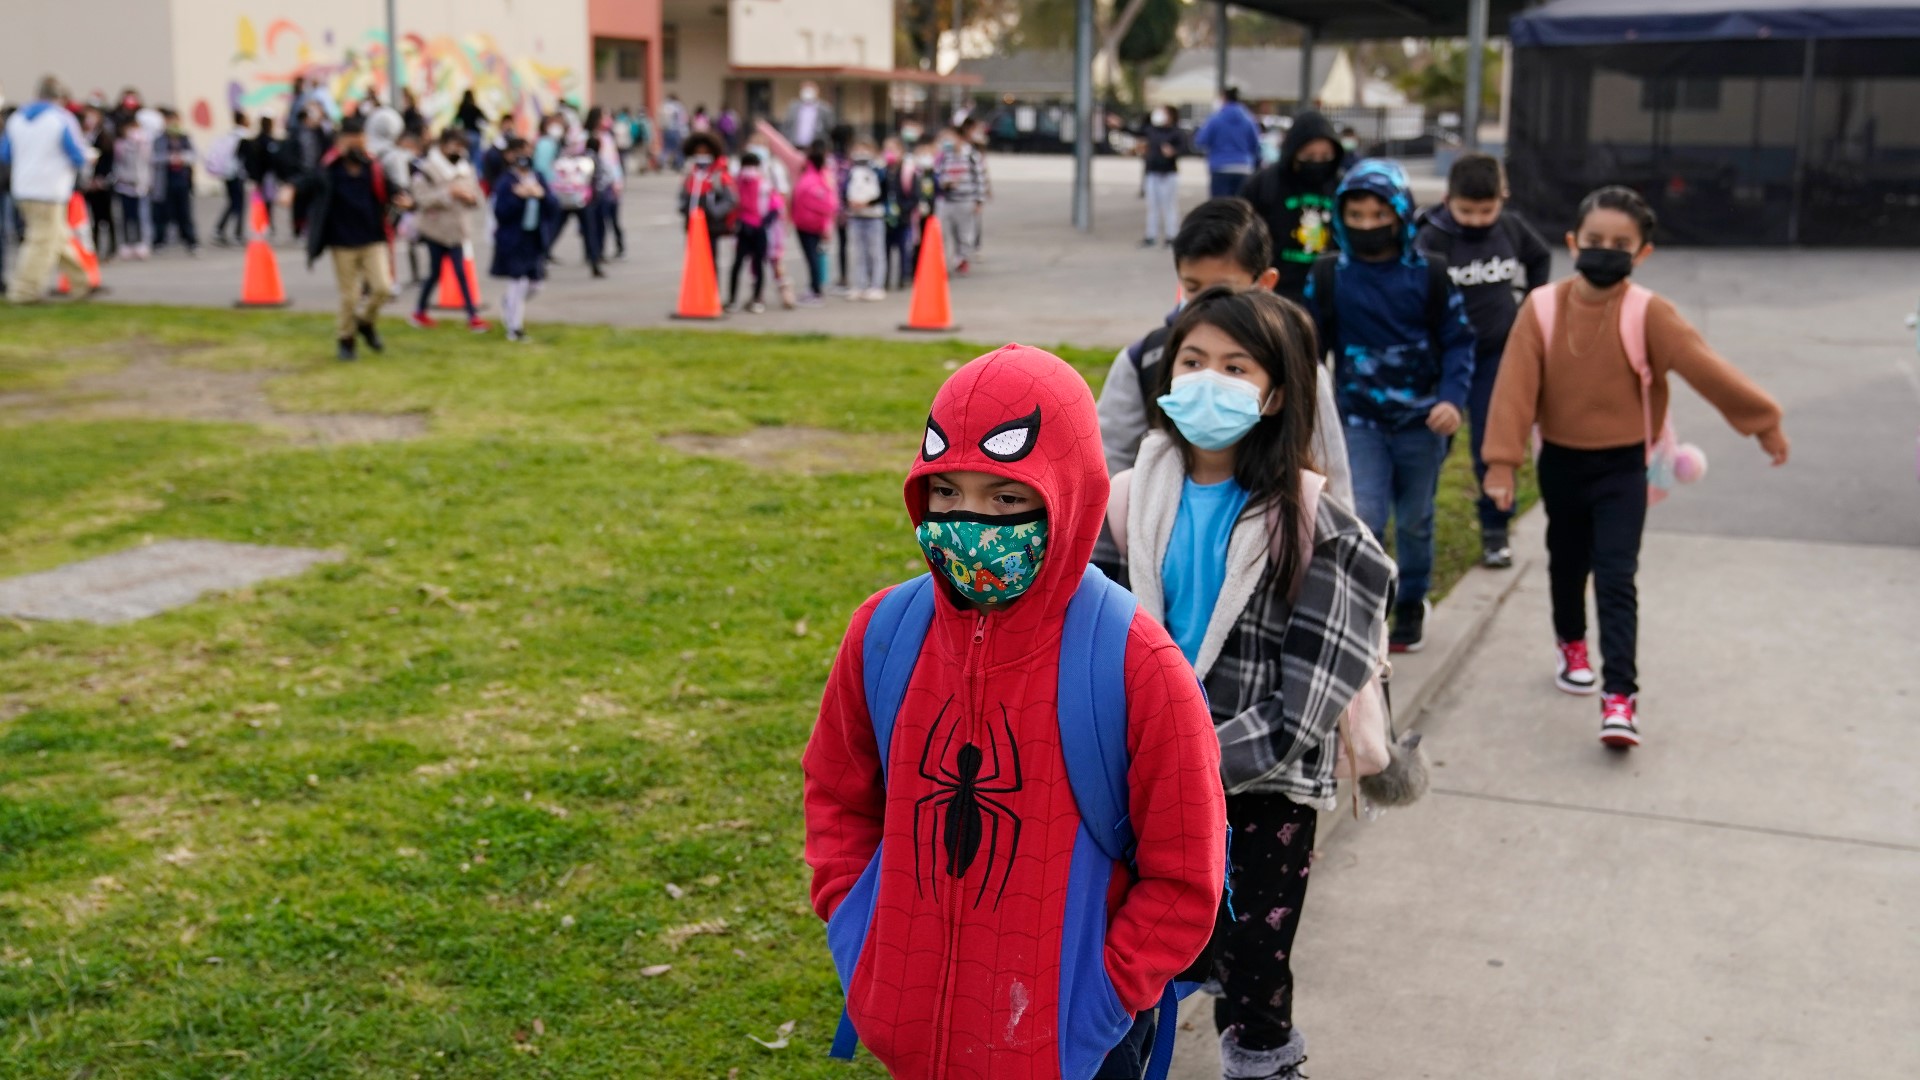 Disruptions are straining Northern California schools as students and staff across the region call out in unprecedented numbers, some either sick or exposed.